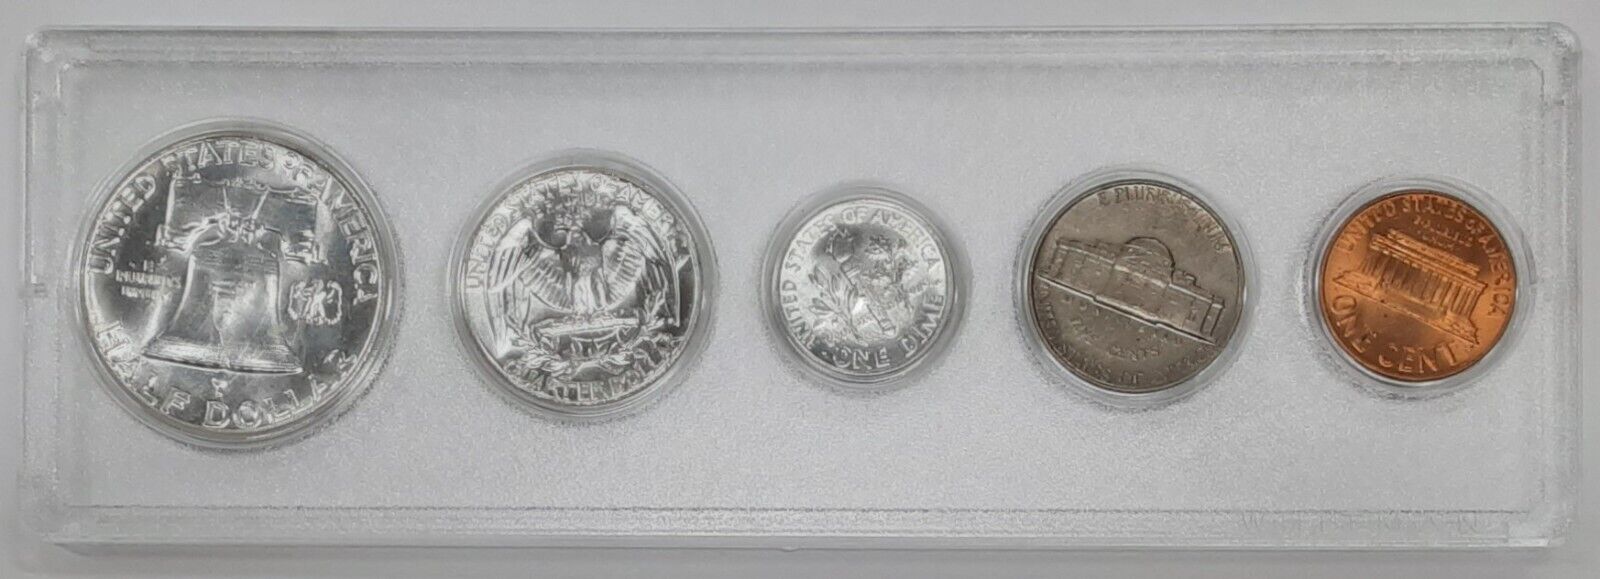 1962 US Uncirculated Year Set with Silver Half Quarter and Dime 5 Coins Total